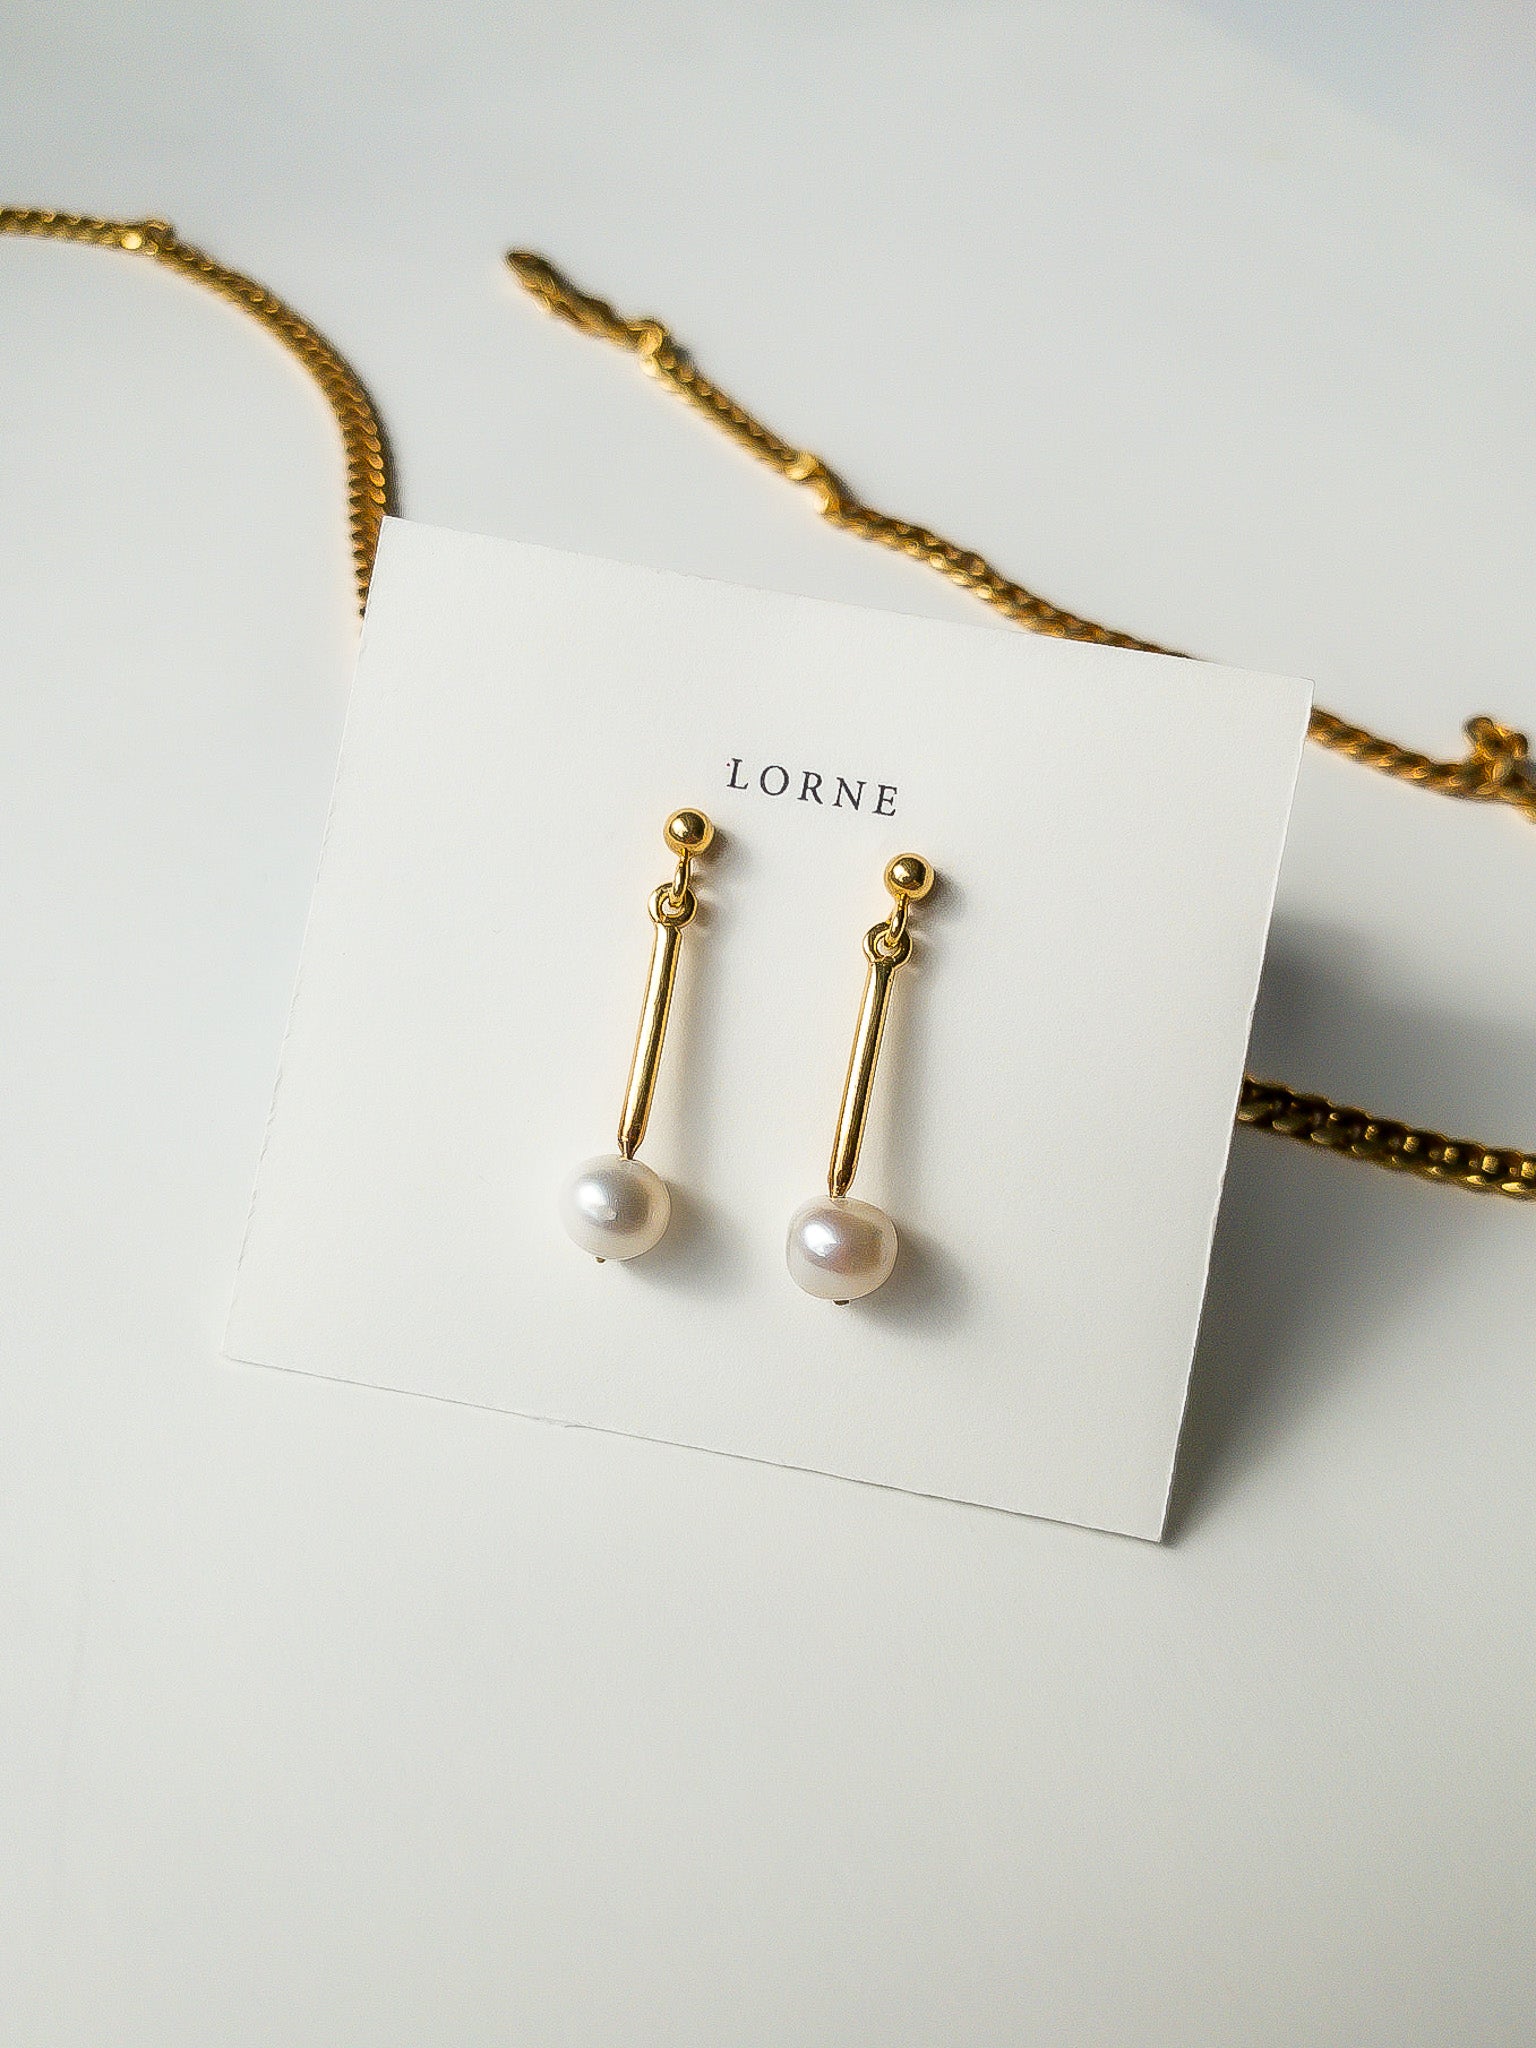 These earrings feature A-grade 6mm pearls securely fastened to 925 sterling silver, ensuring durability and long-lasting beauty.  Versatile Style: These solitaire pearl earrings are versatile enough to be worn for any occasion, seamlessly transitioning from day to evening wear.